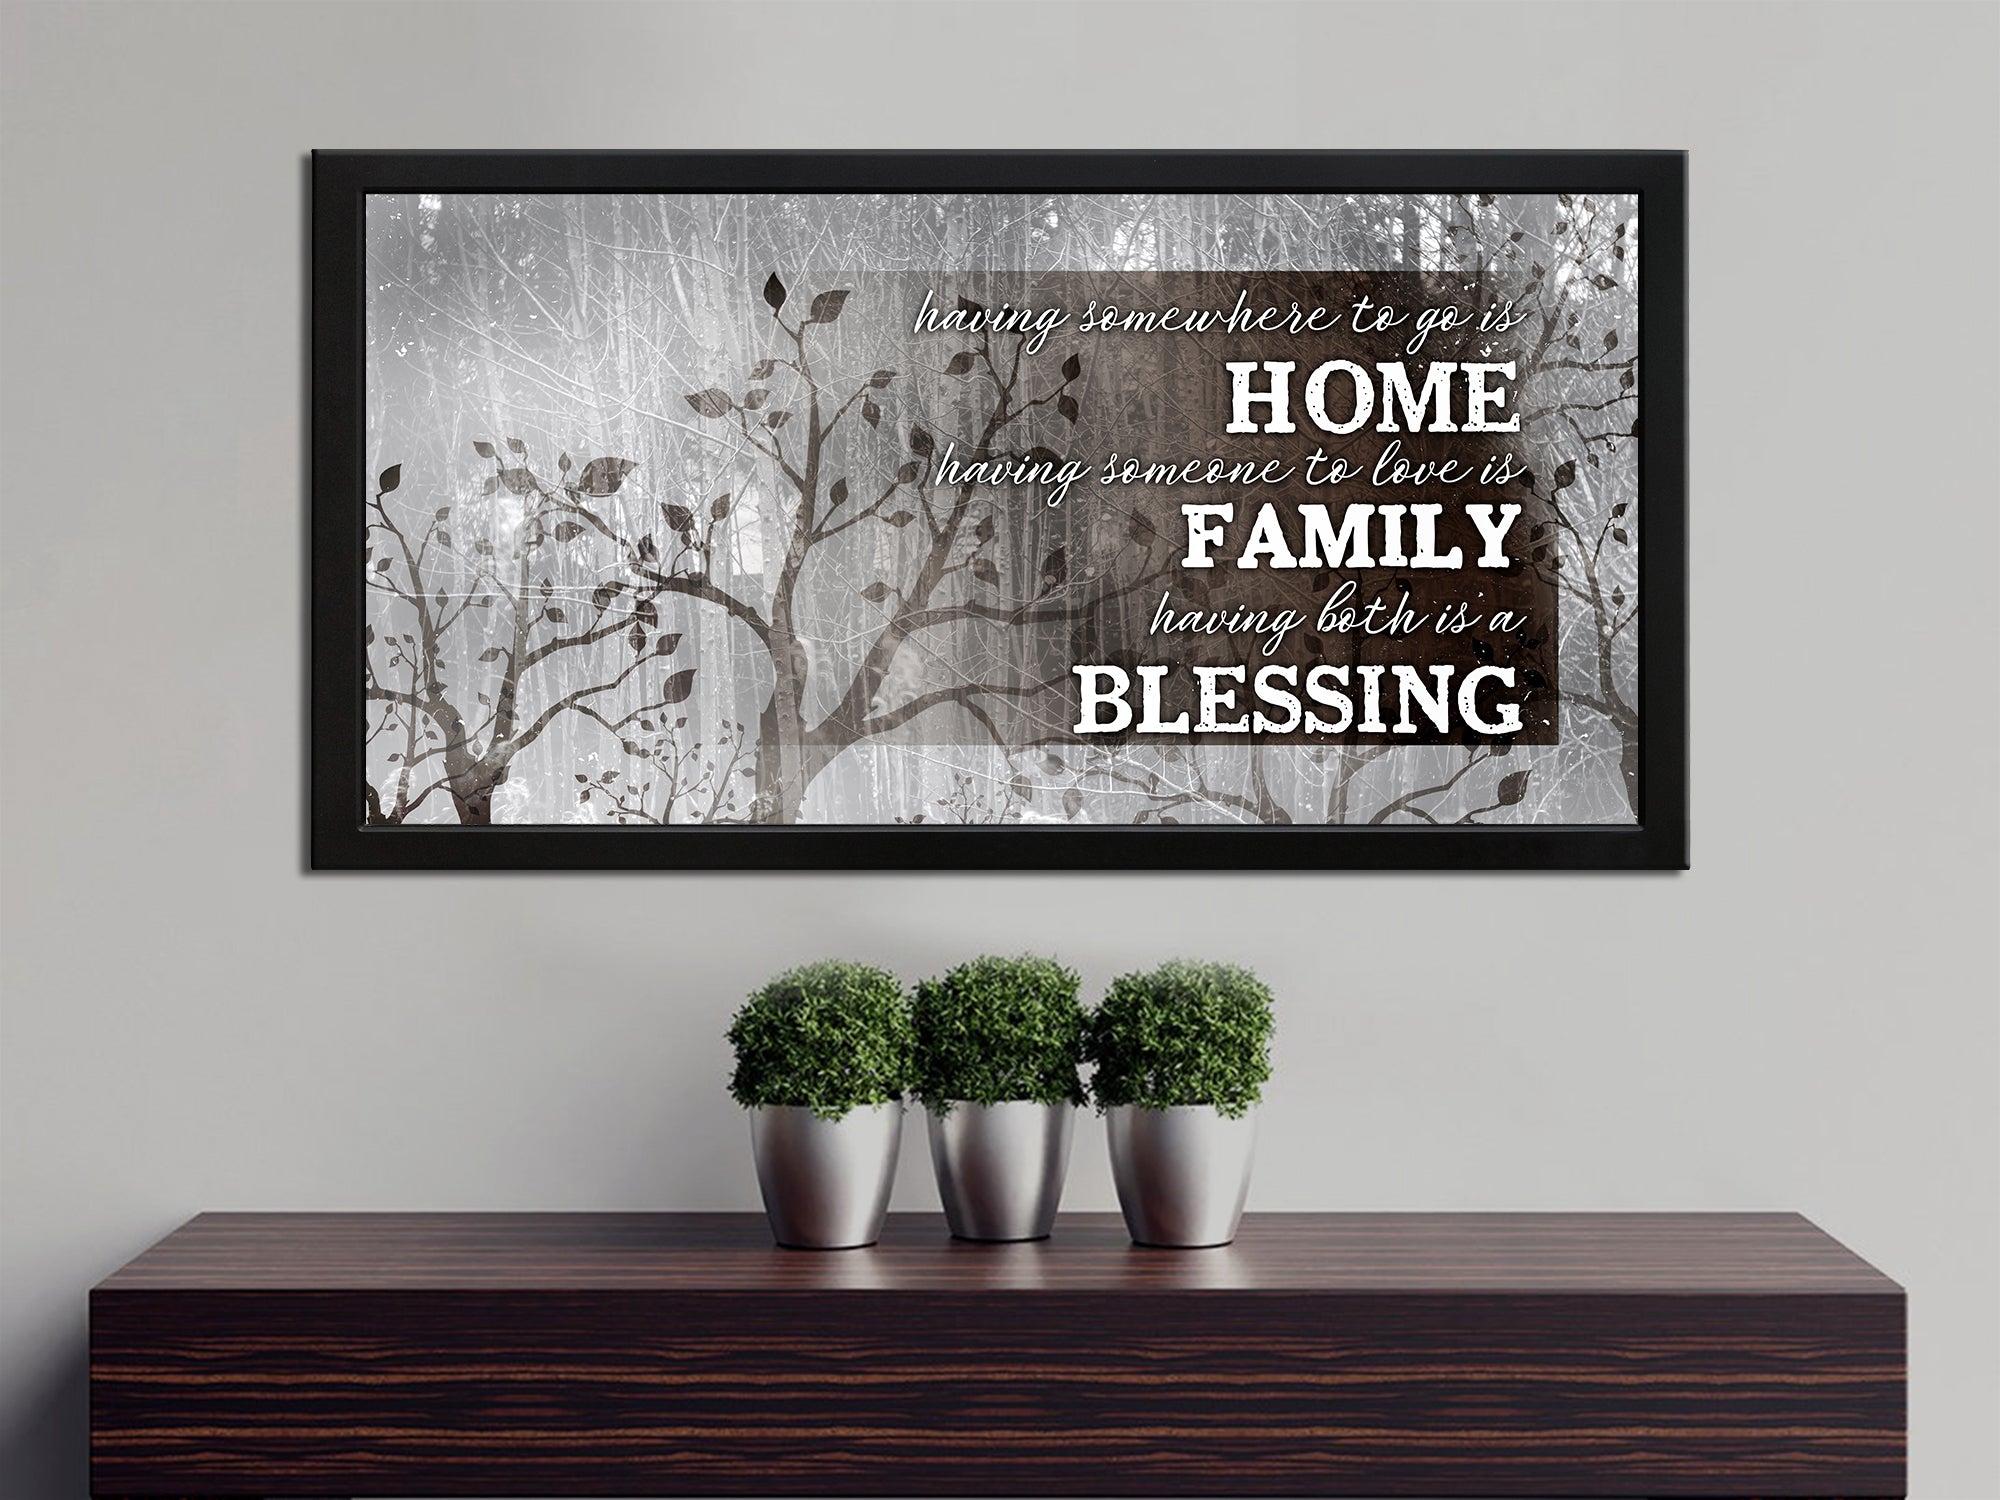 Home family blessing - Living Room - Canvas Wall Art